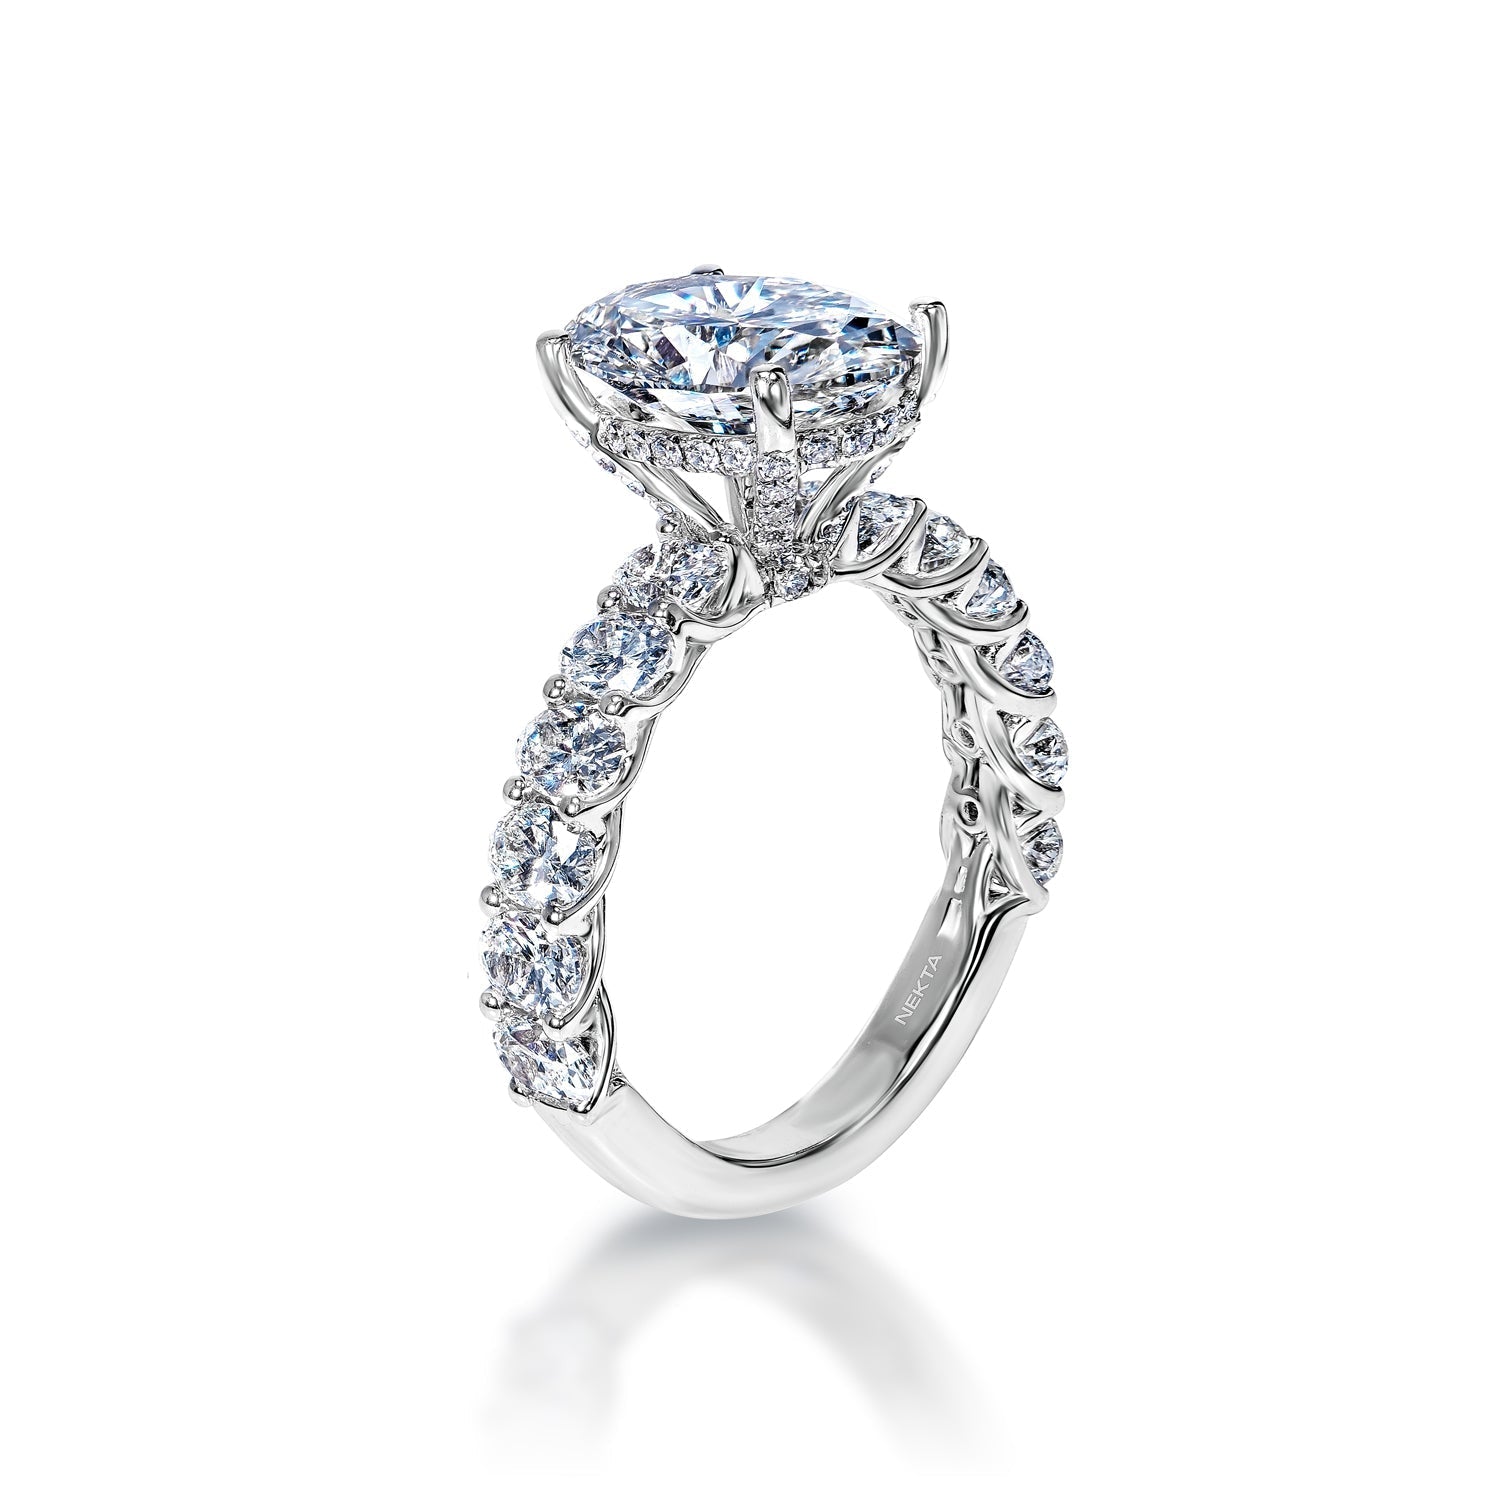 Maisie 5 Carats E VS1 Oval Cut Diamond Engagement Ring in 18k White Gold Side View